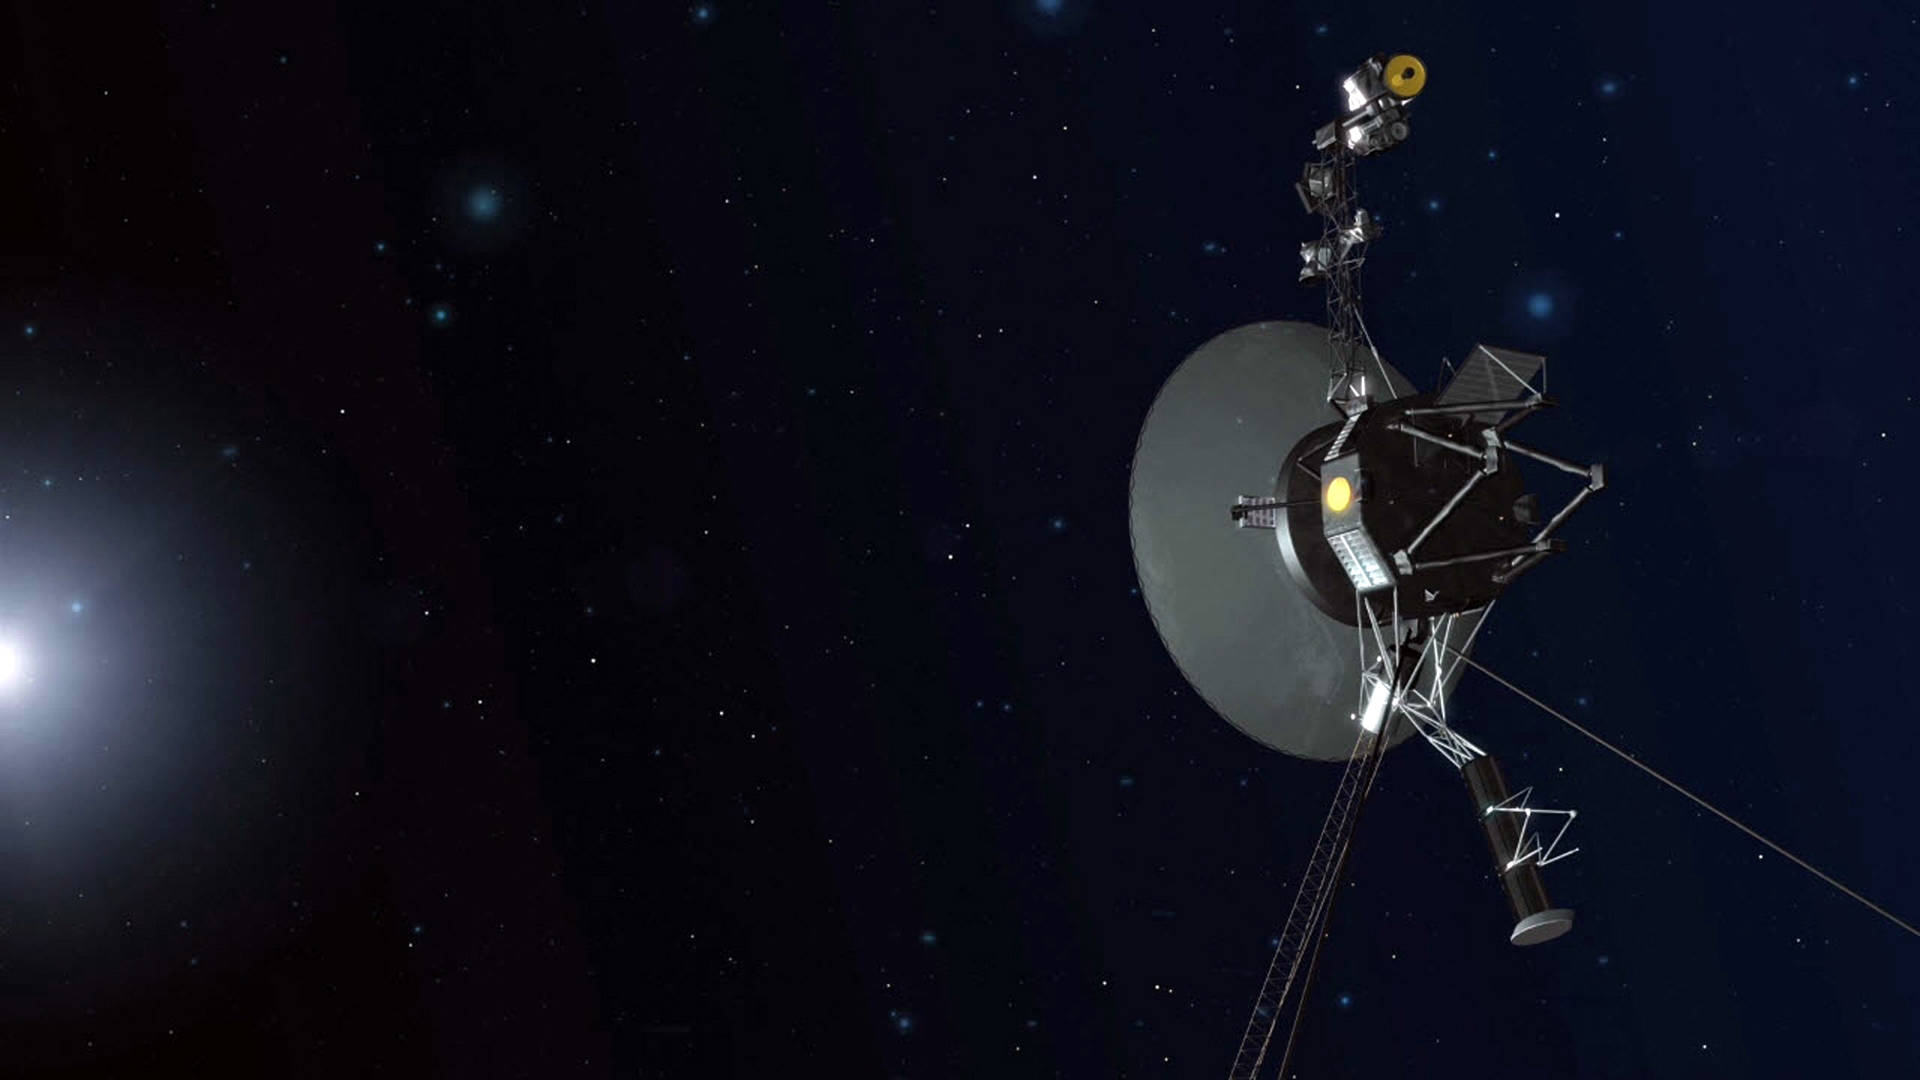 Artist illustration of Voyager 1 in deep space, far from the sun and planets of the solar system.  NASA